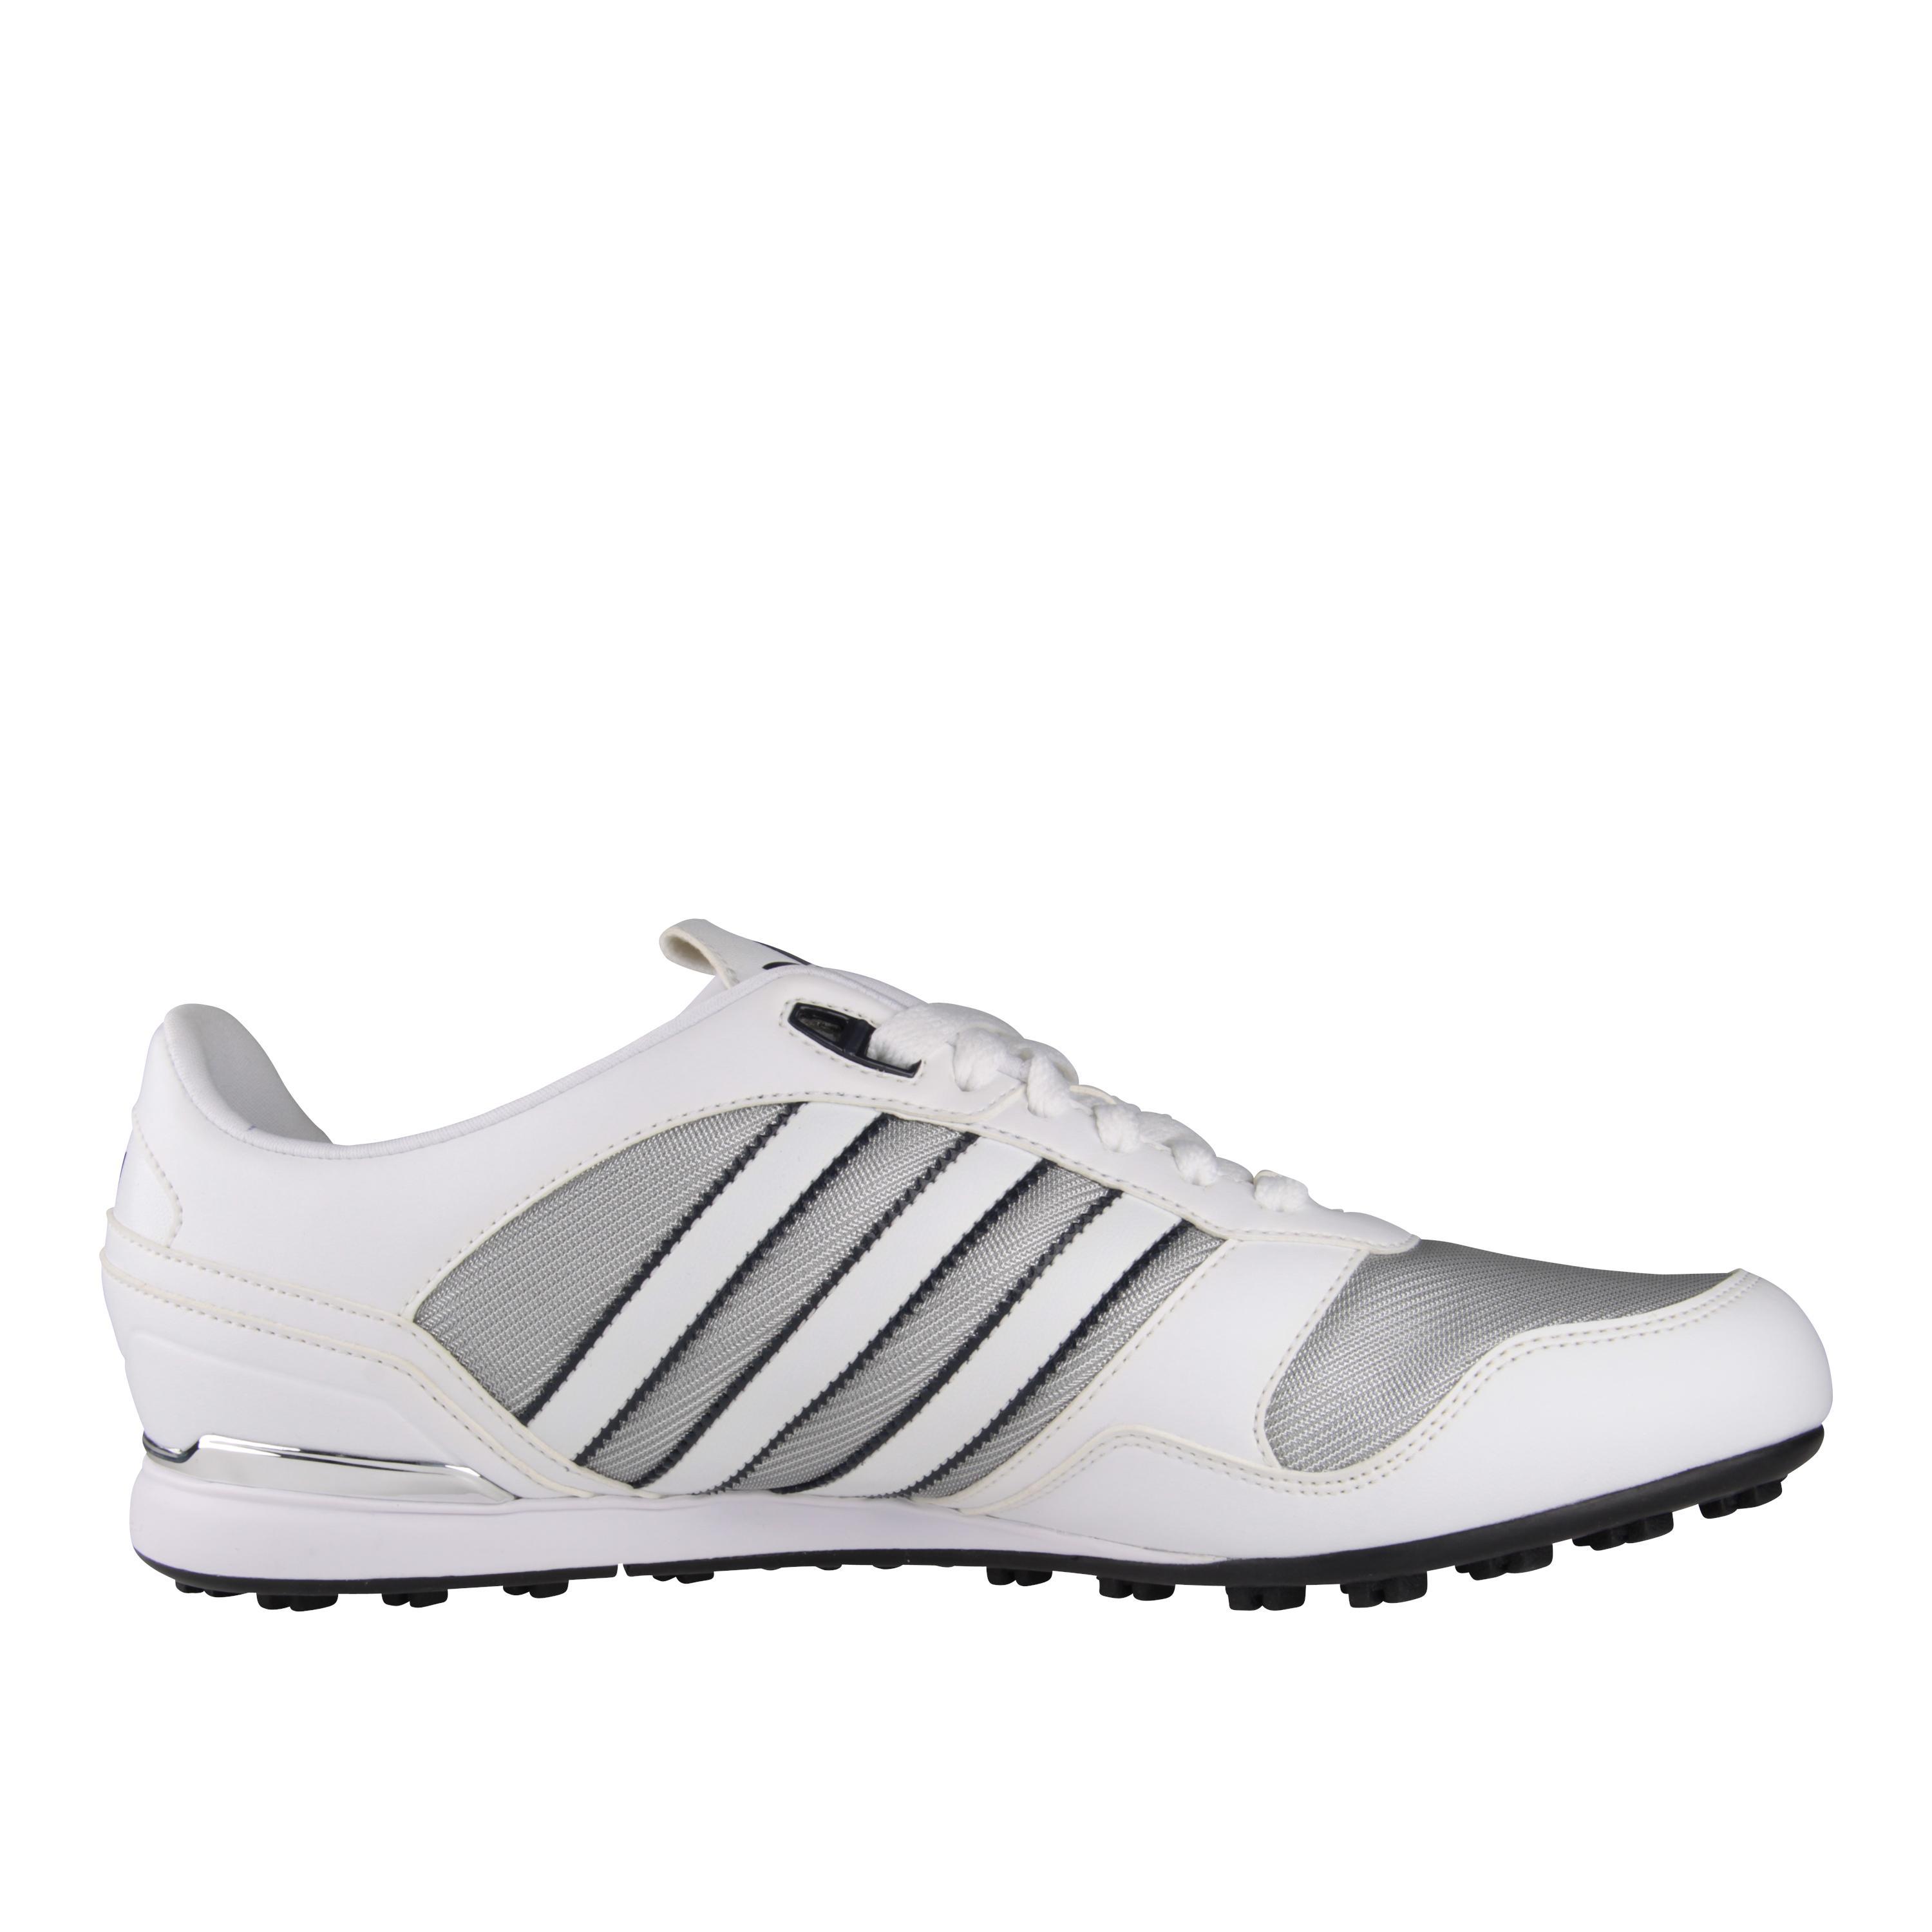 Foto adidas Zx Country 2 foto 301026